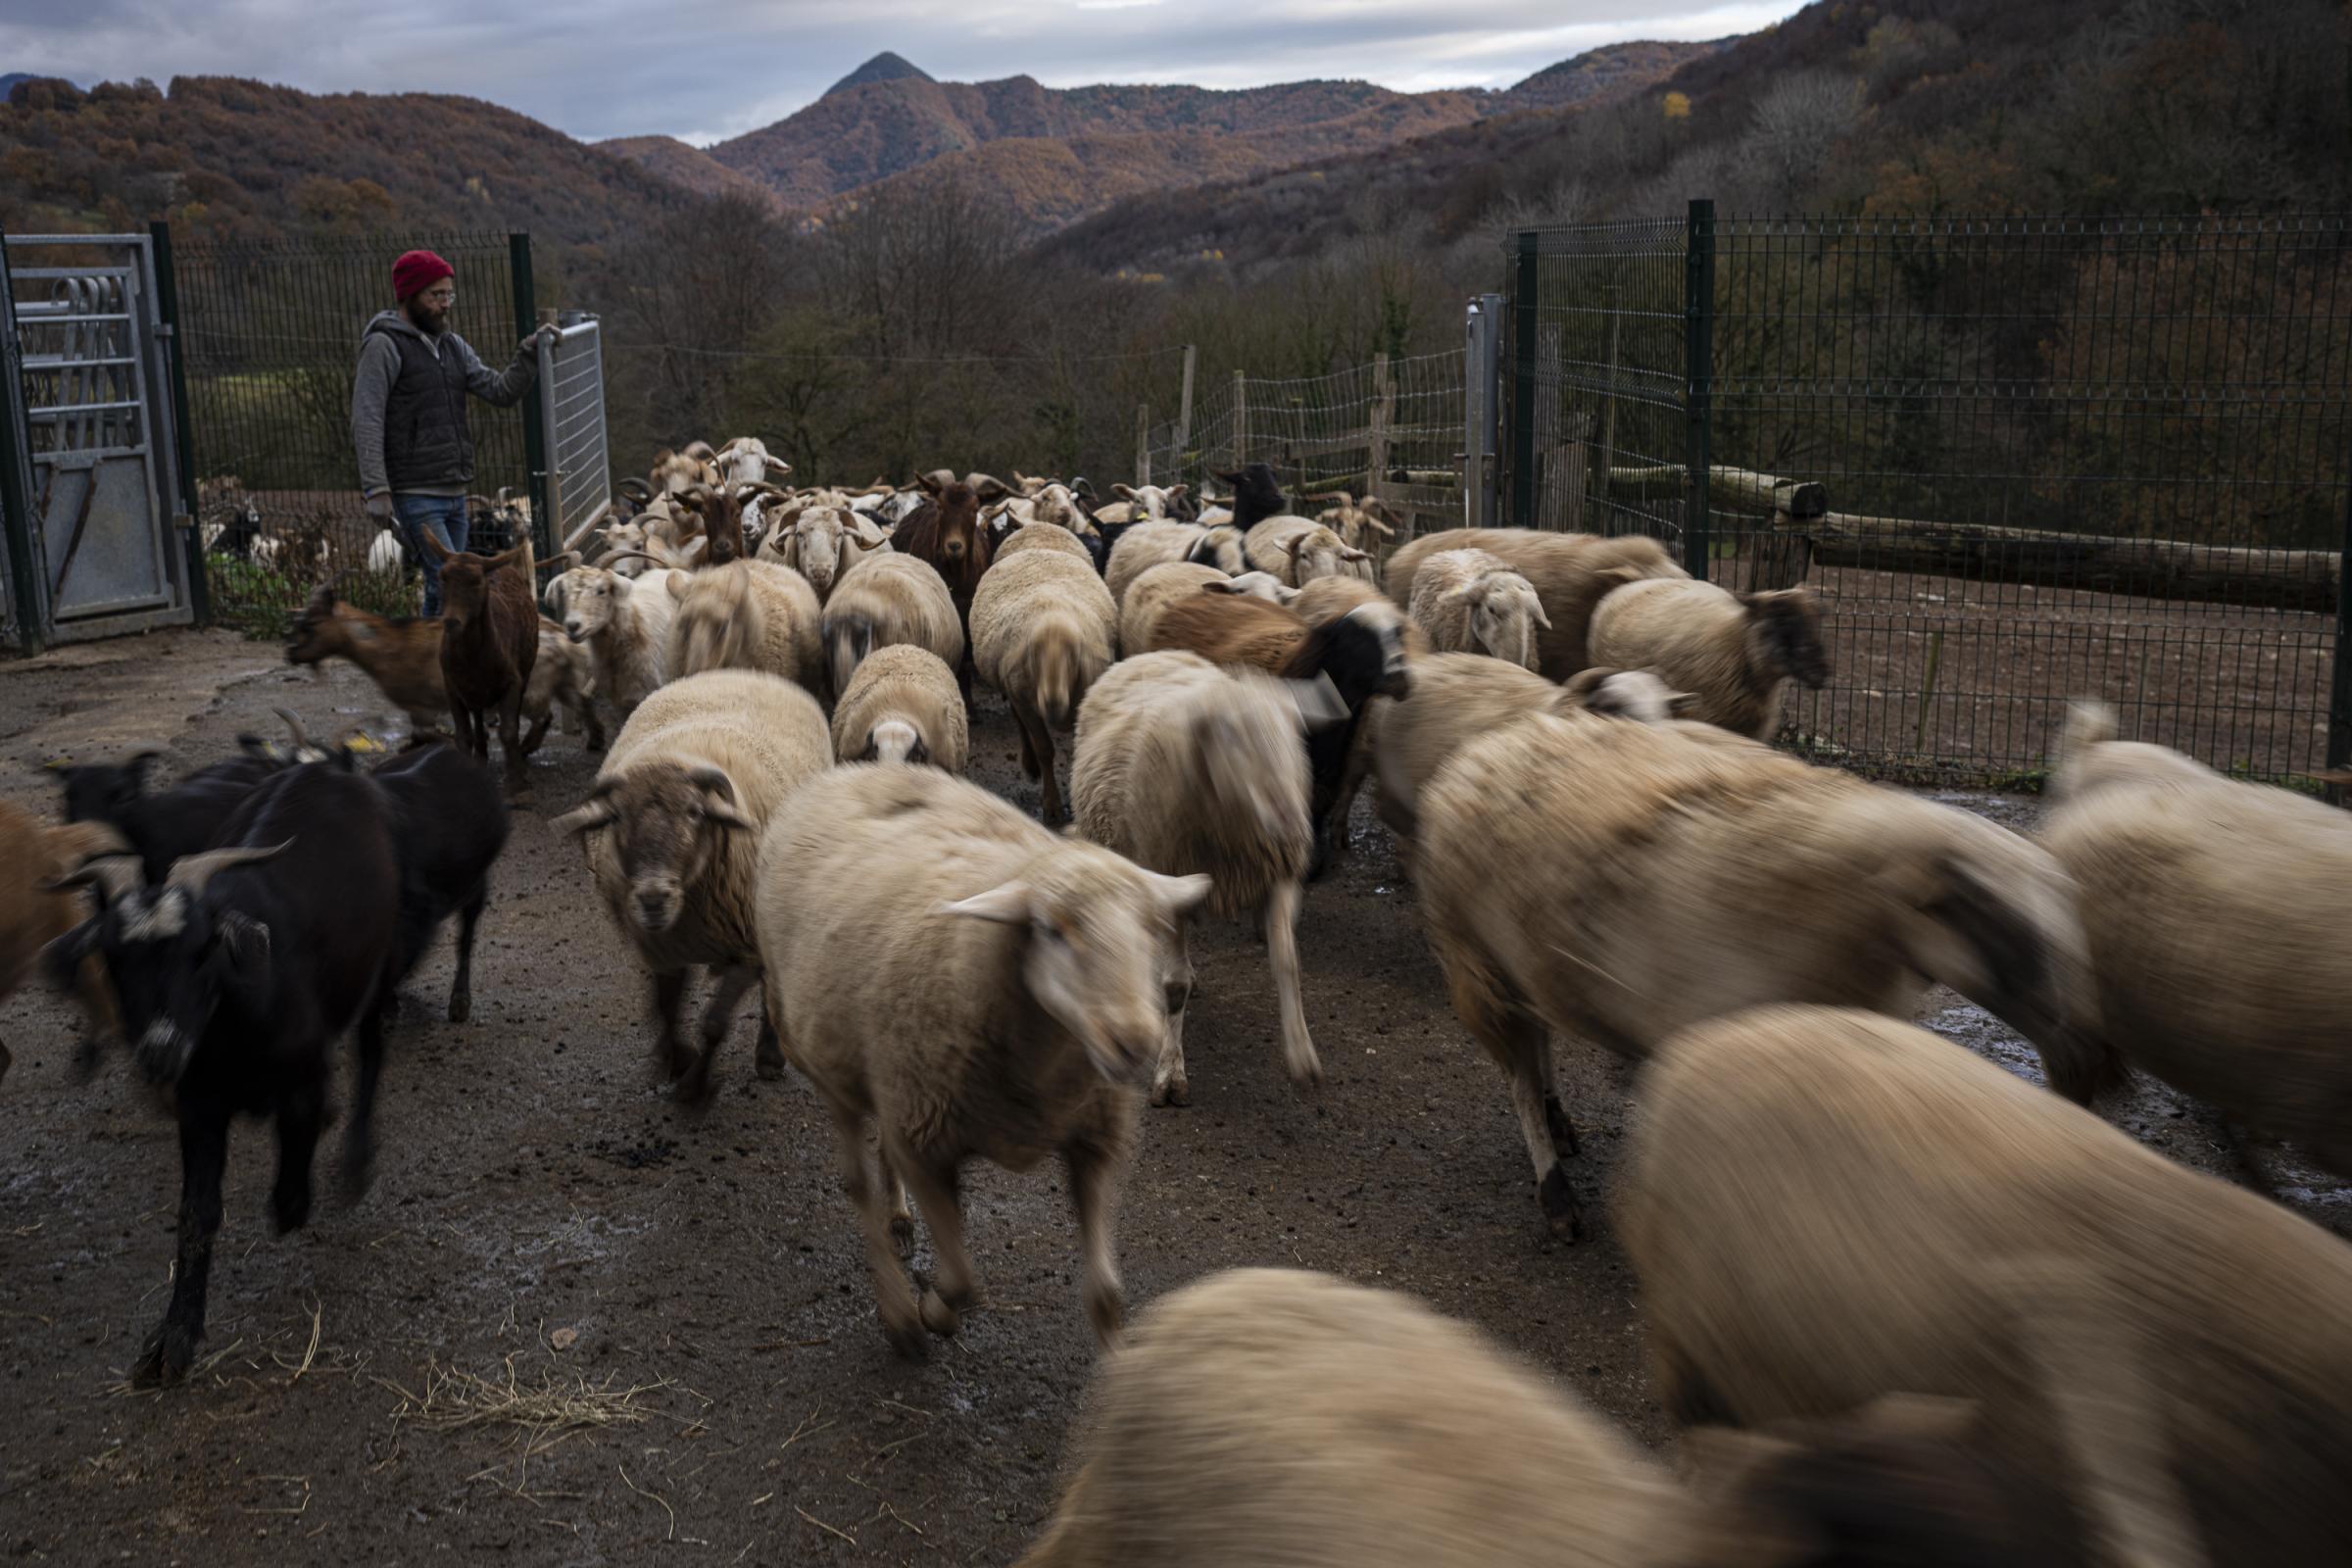 Coexist - After sunset, sheep and goats wander through the...